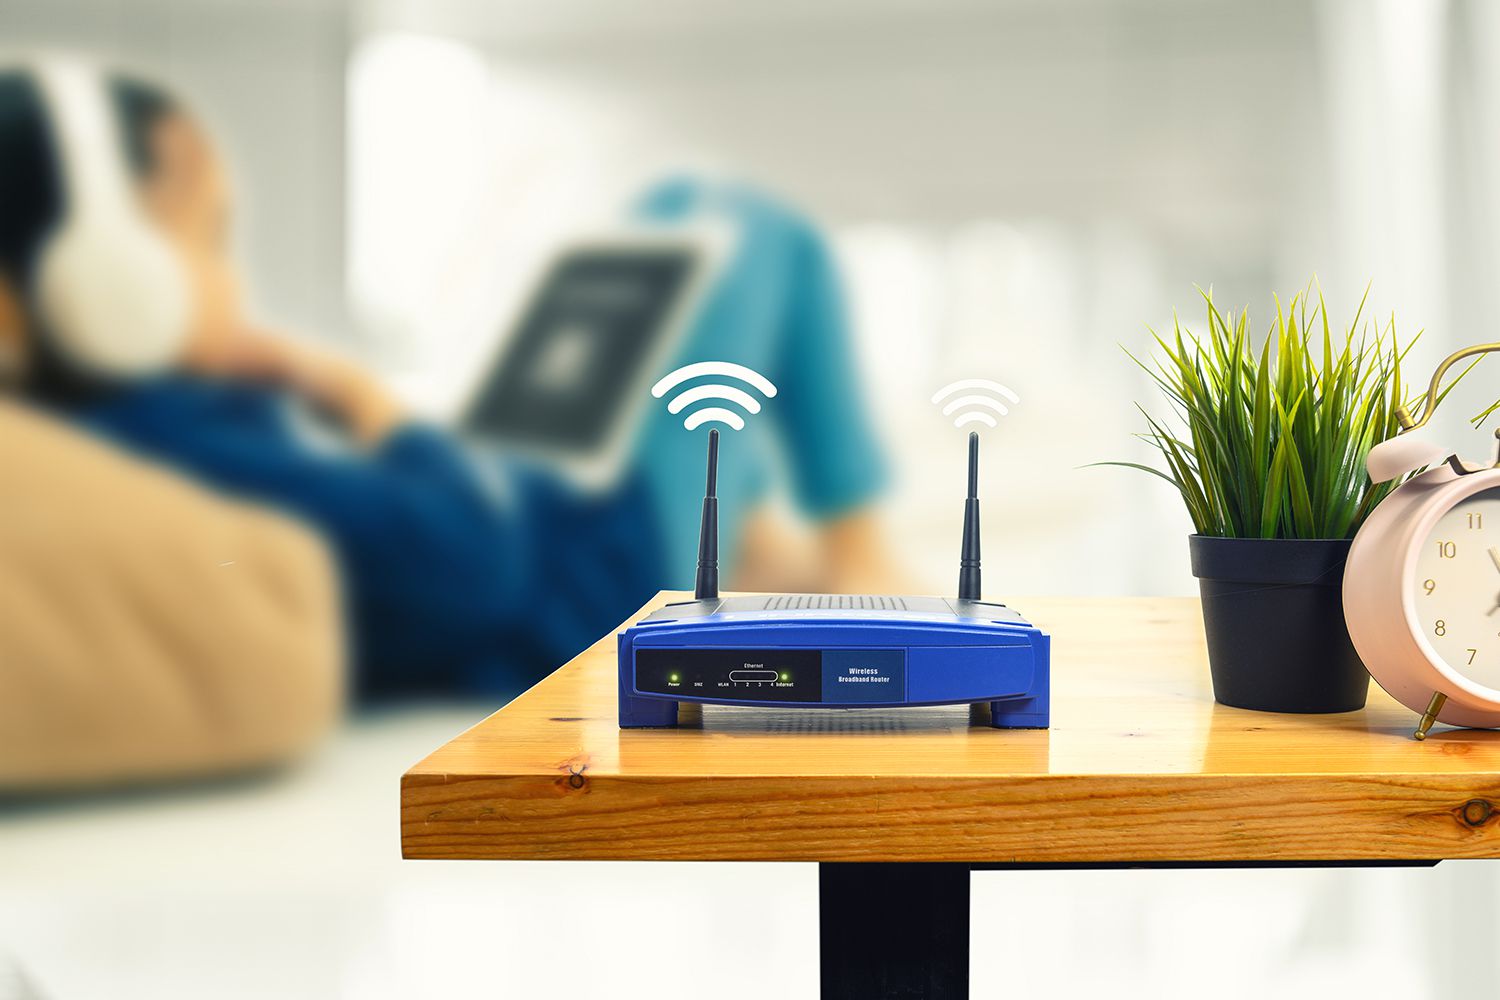 How To Limit Data Usage On Wi-Fi Router Per User